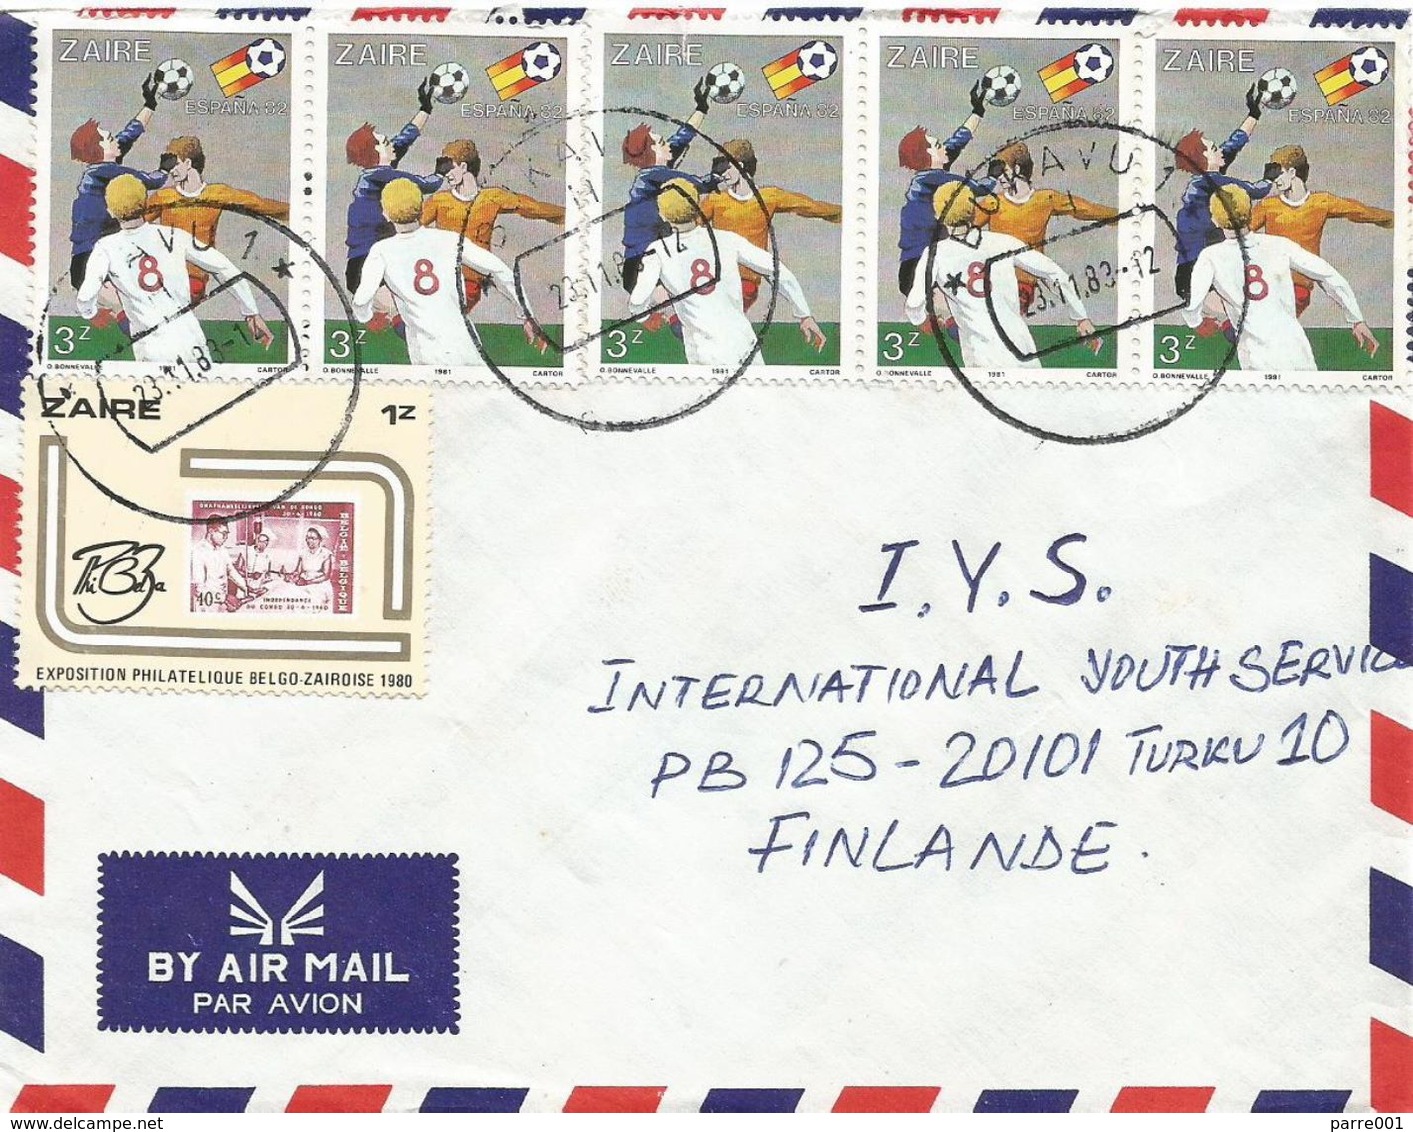 Zaire DRC Congo 1983 Bukavu World Cup Football Spain 3Z Stamp Exhibition Stamps On Stamps 1Z Cover - Usati